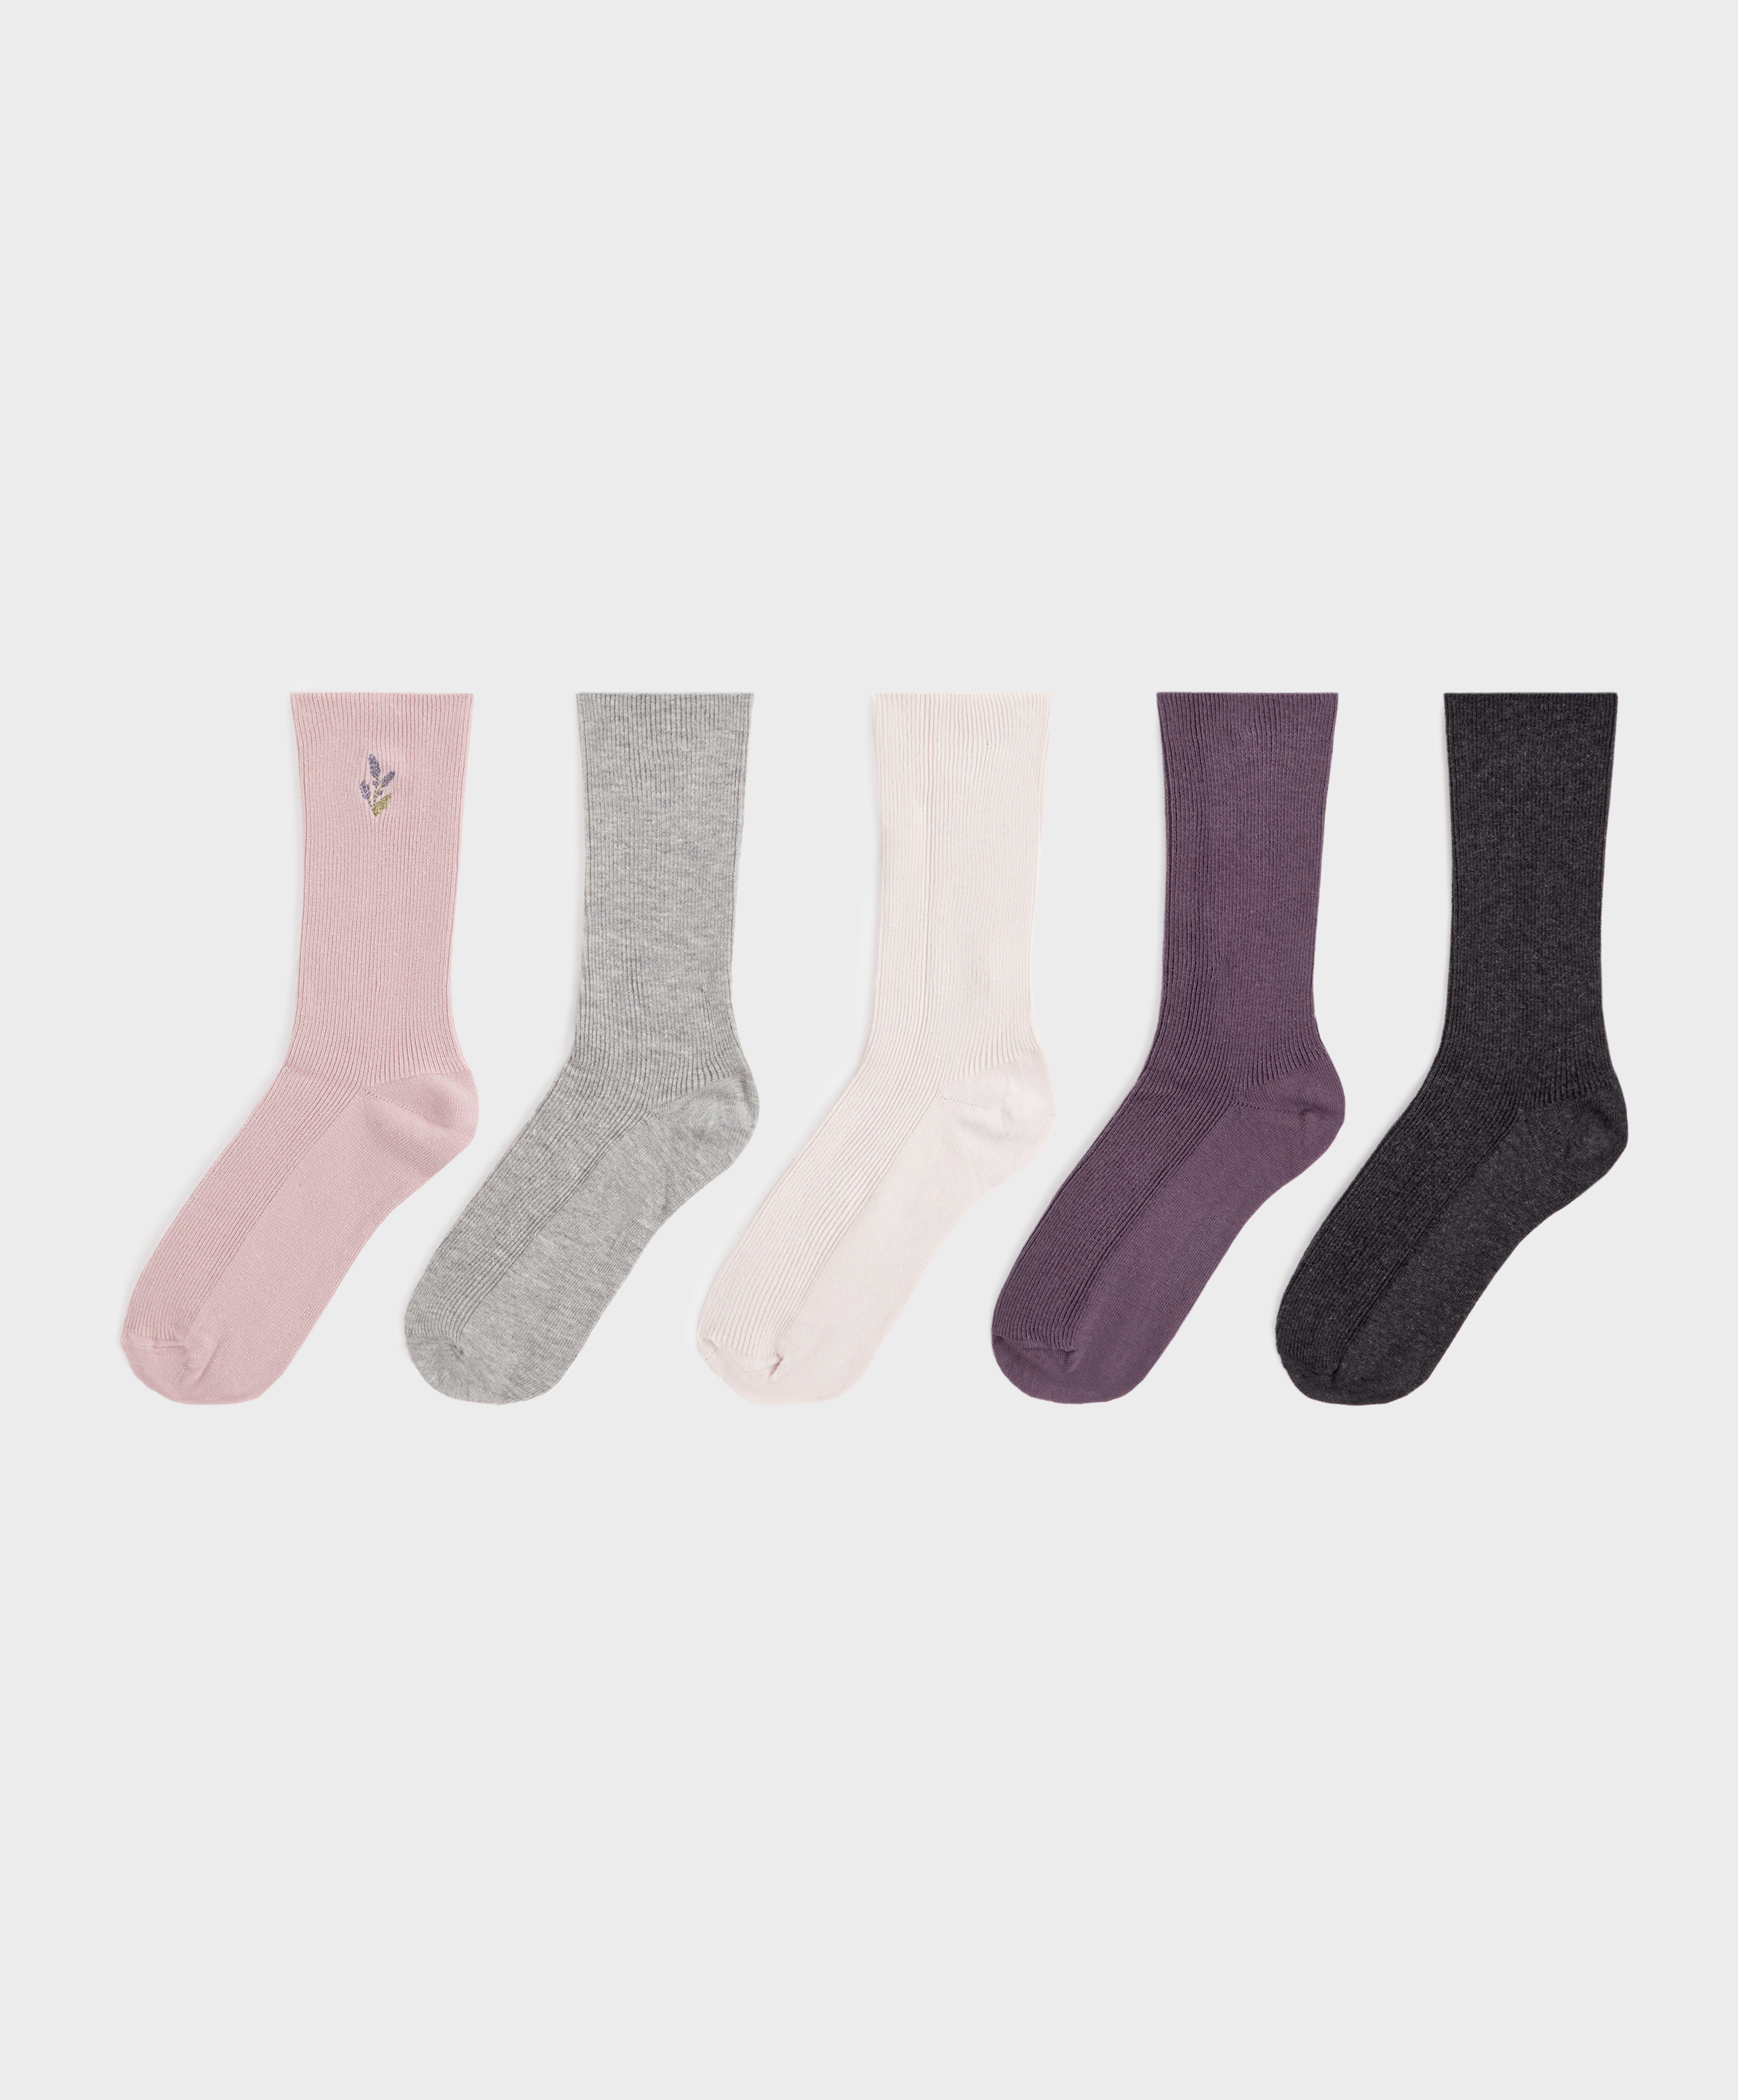 5 pairs of ribbed cotton classic socks